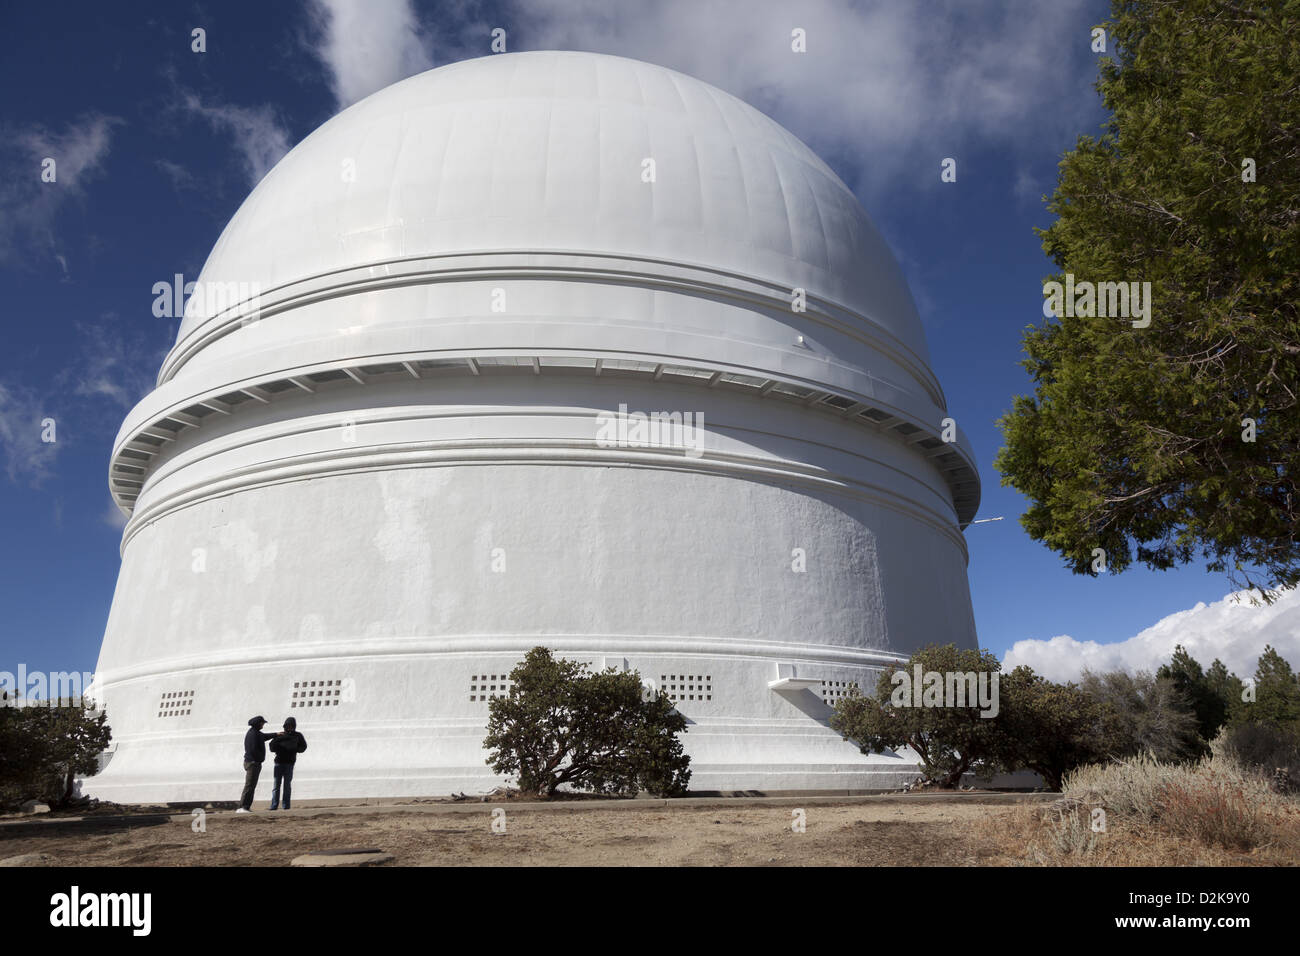 Very large white dome of the Palomar Observatory an astronomical observatory located in San Diego County, California Stock Photo